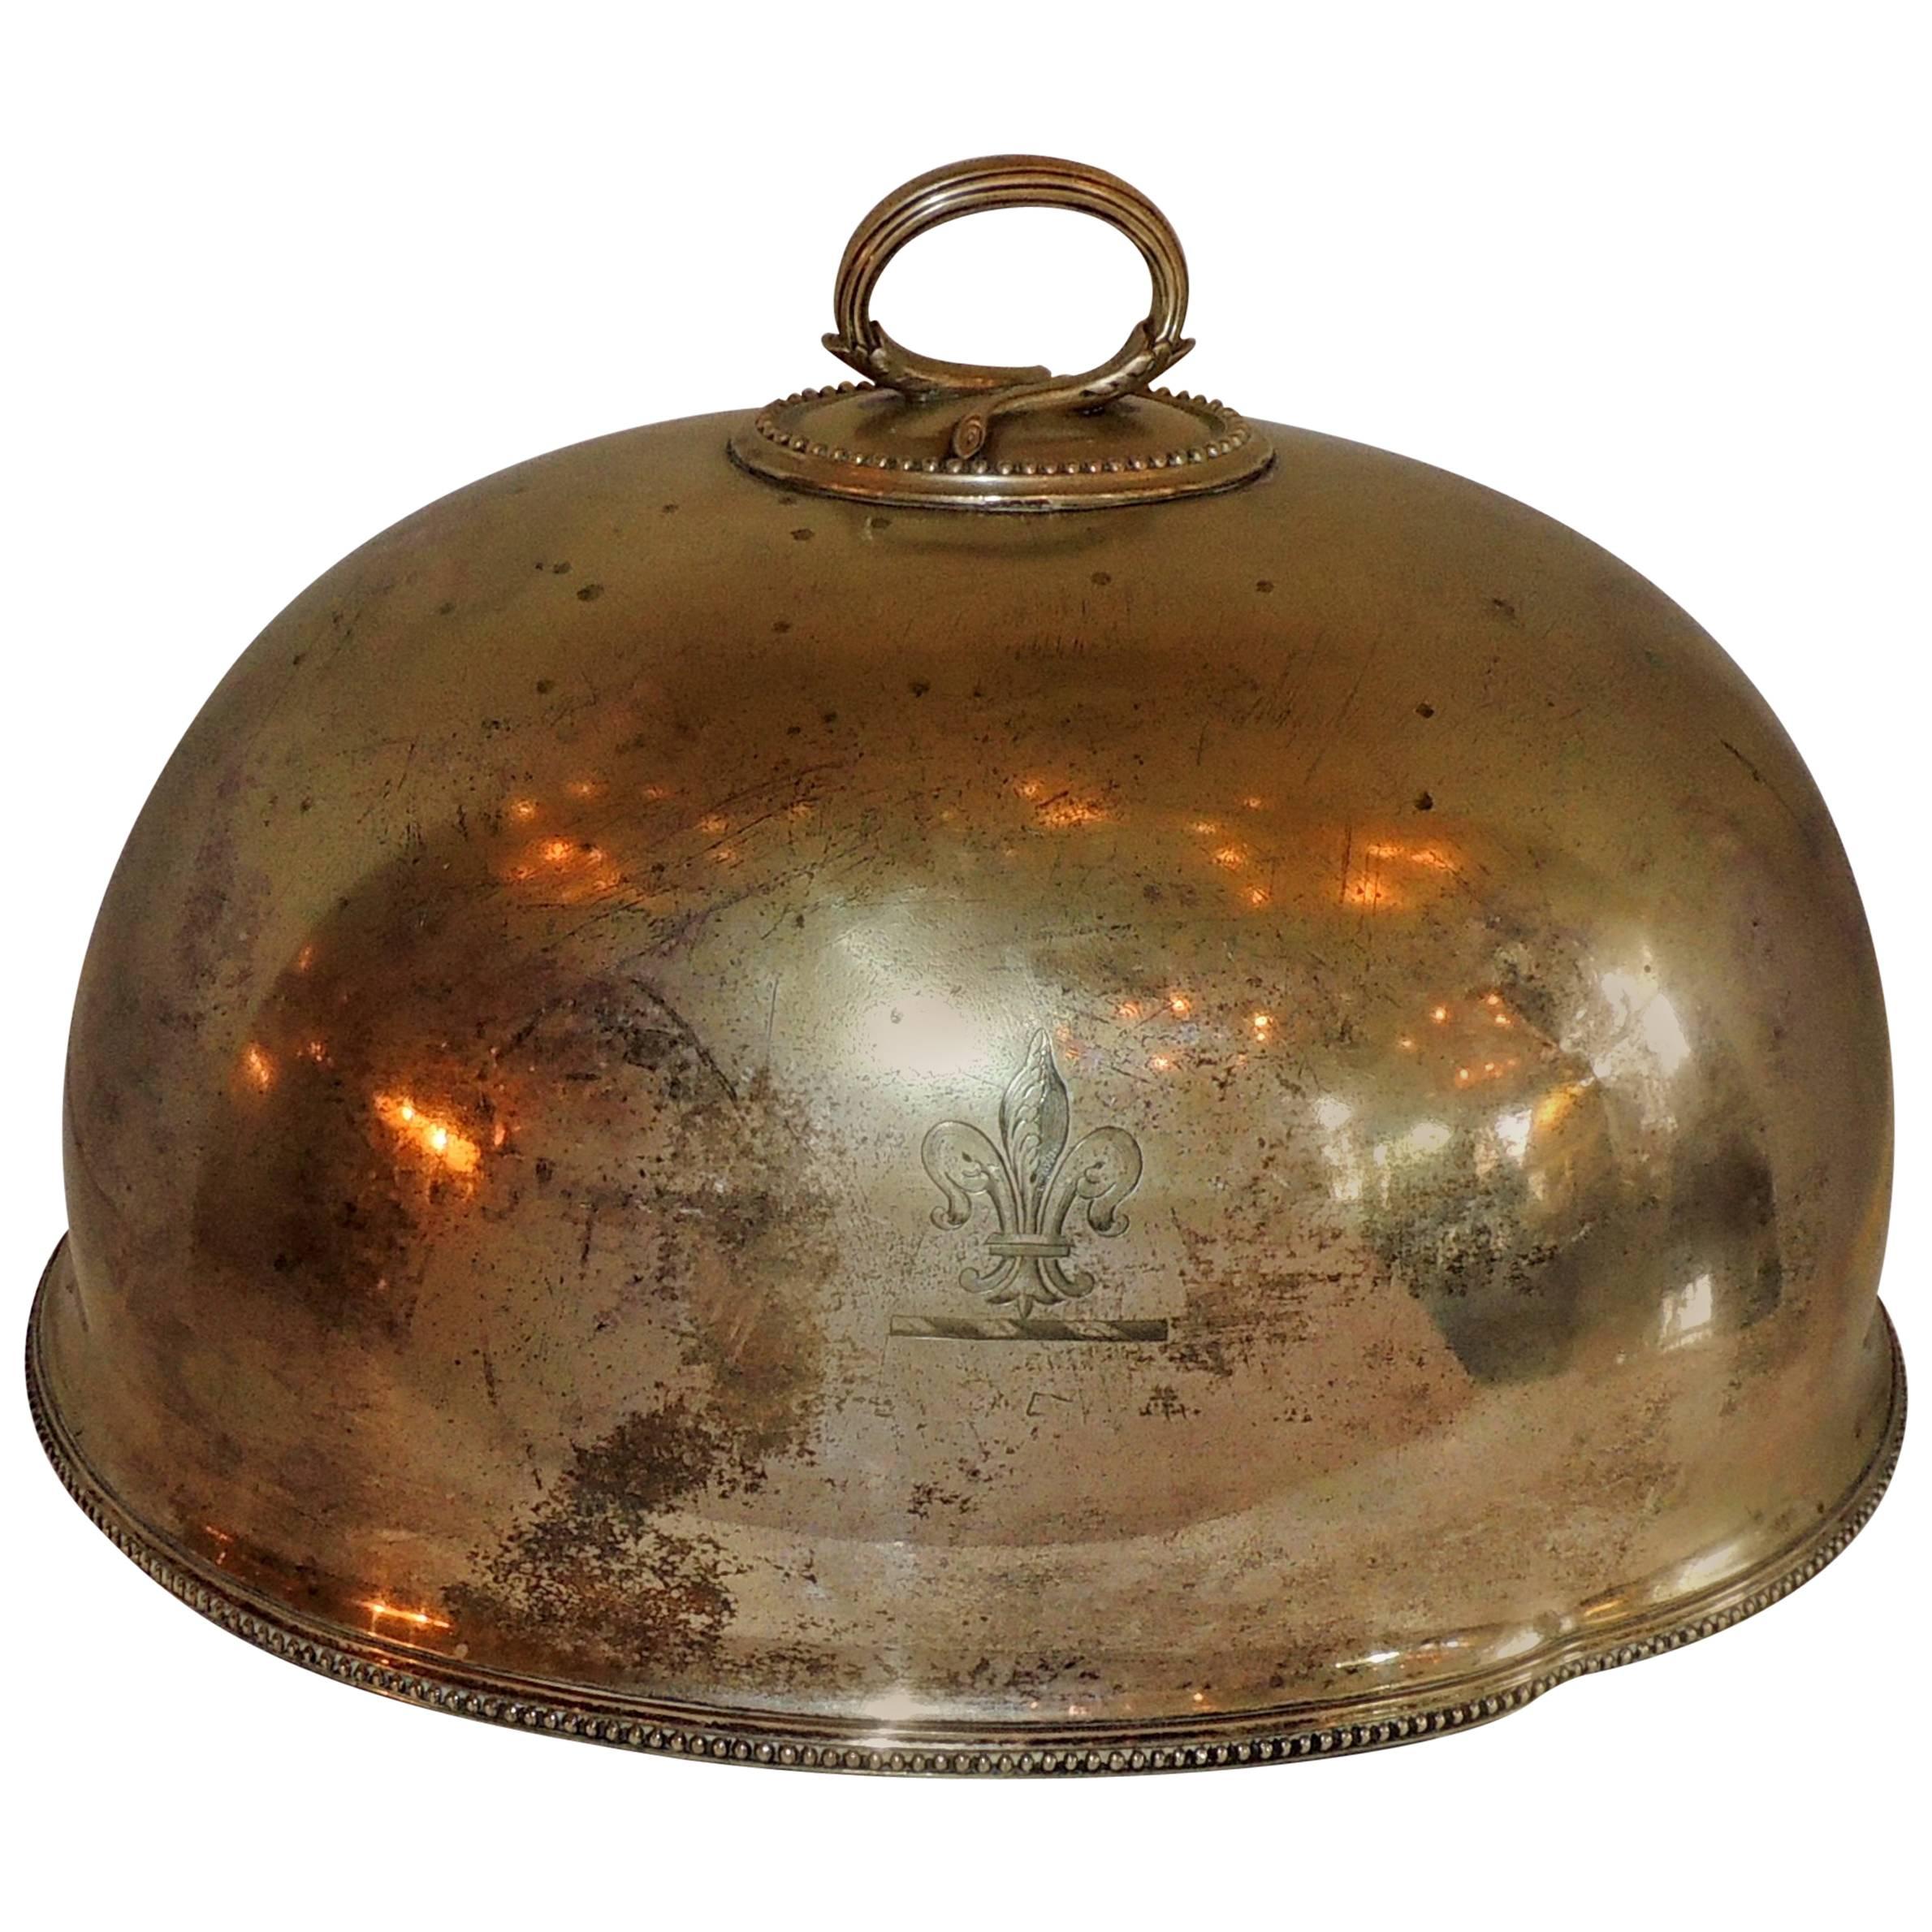 Antique Serving Silver Plated Meat Food Turkey Dome Cover Victorian Cloche Large